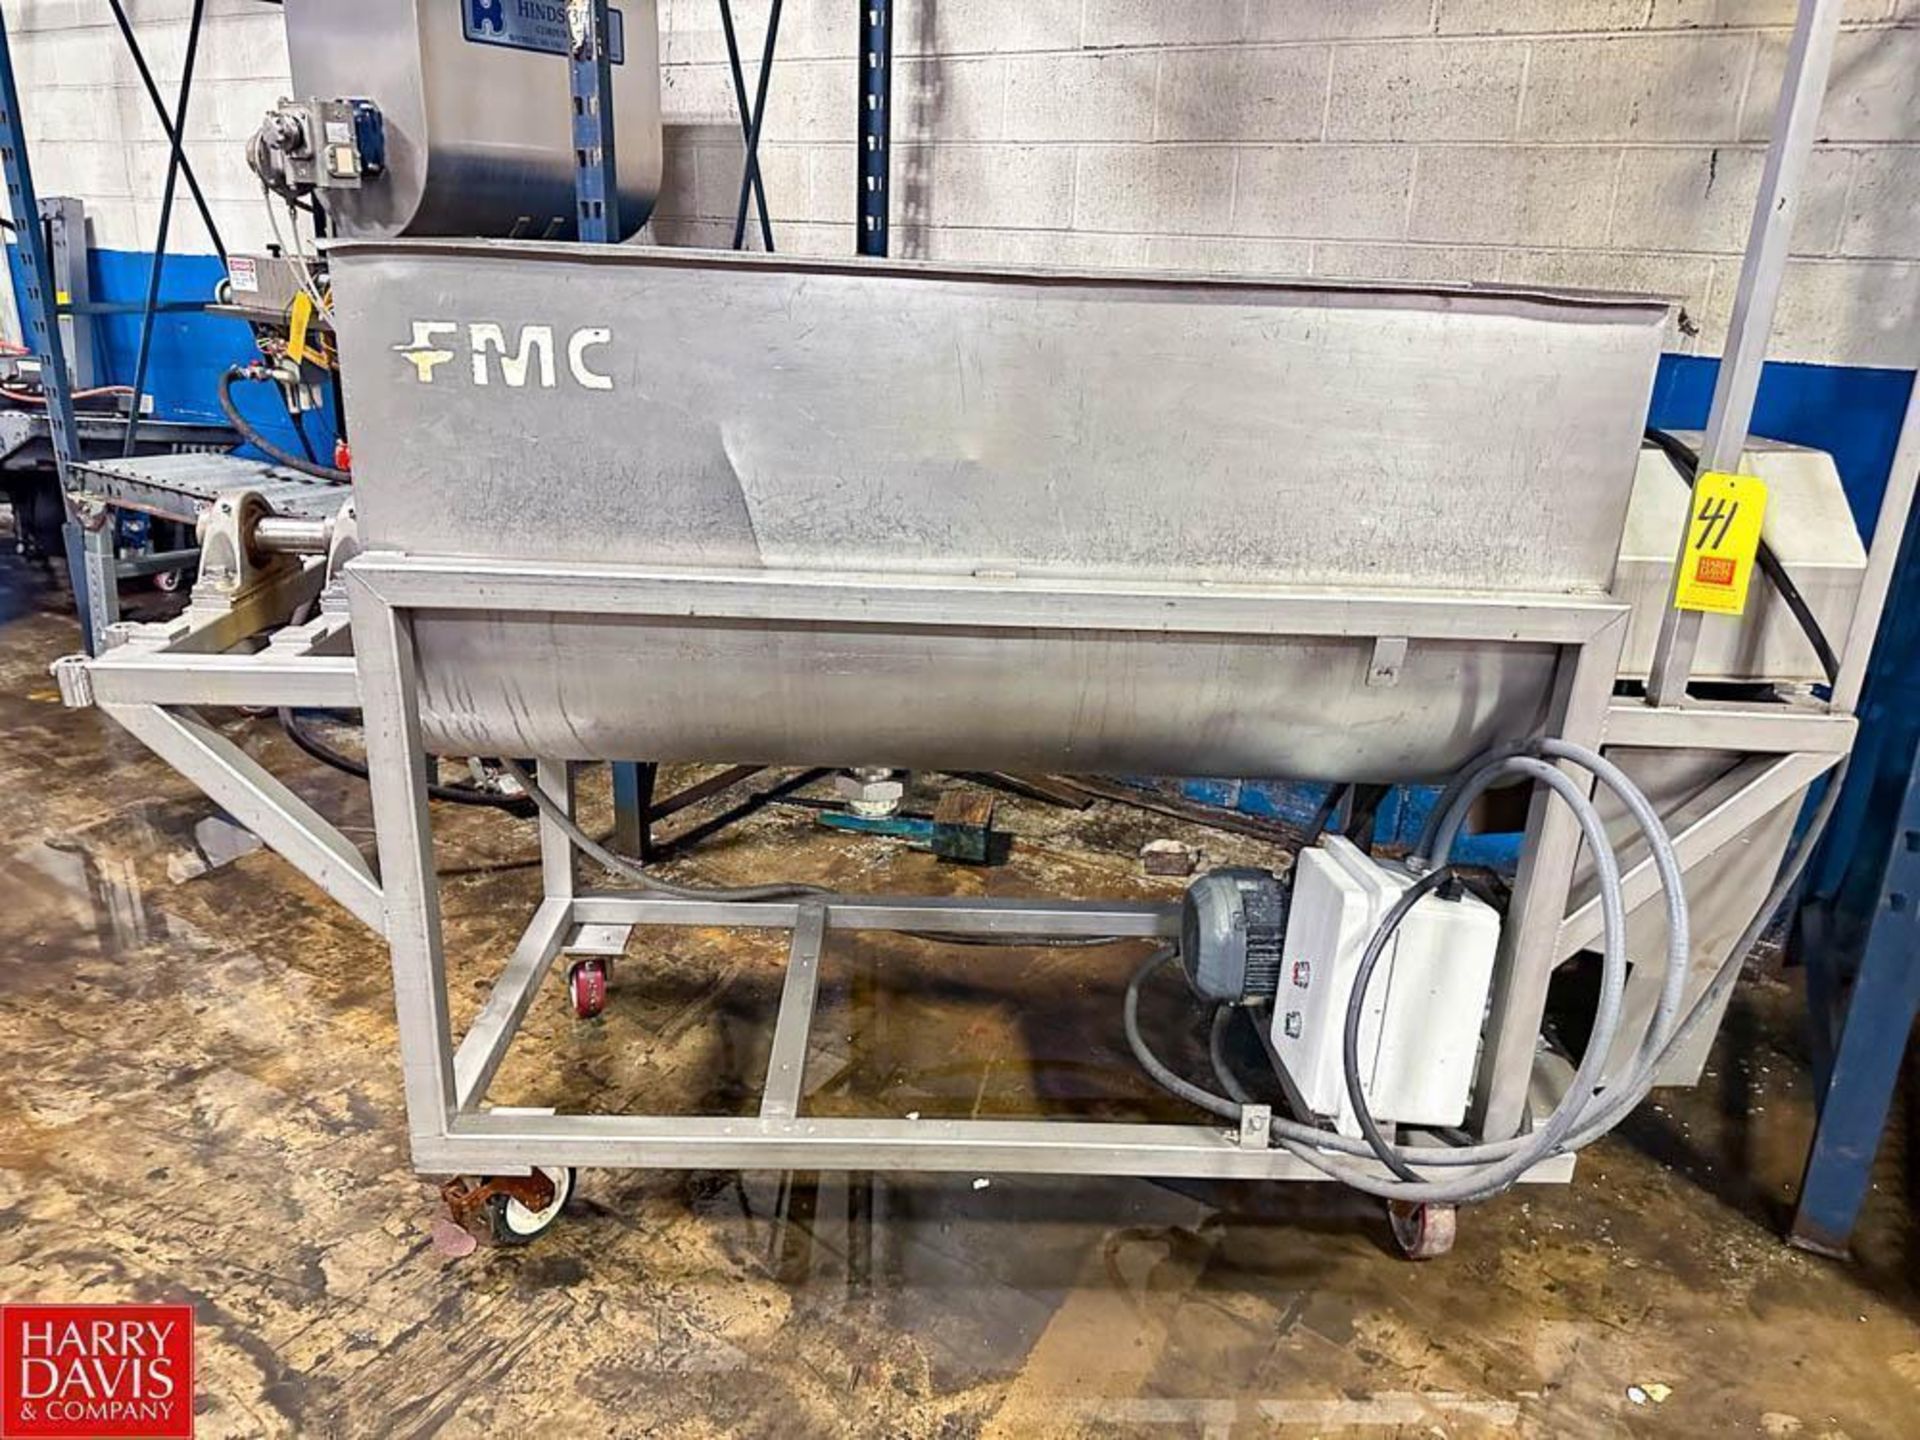 FMC S/S Blender with Motor, Gear Reducing Drive and Mounted On Casters - Rigging Fee: $250